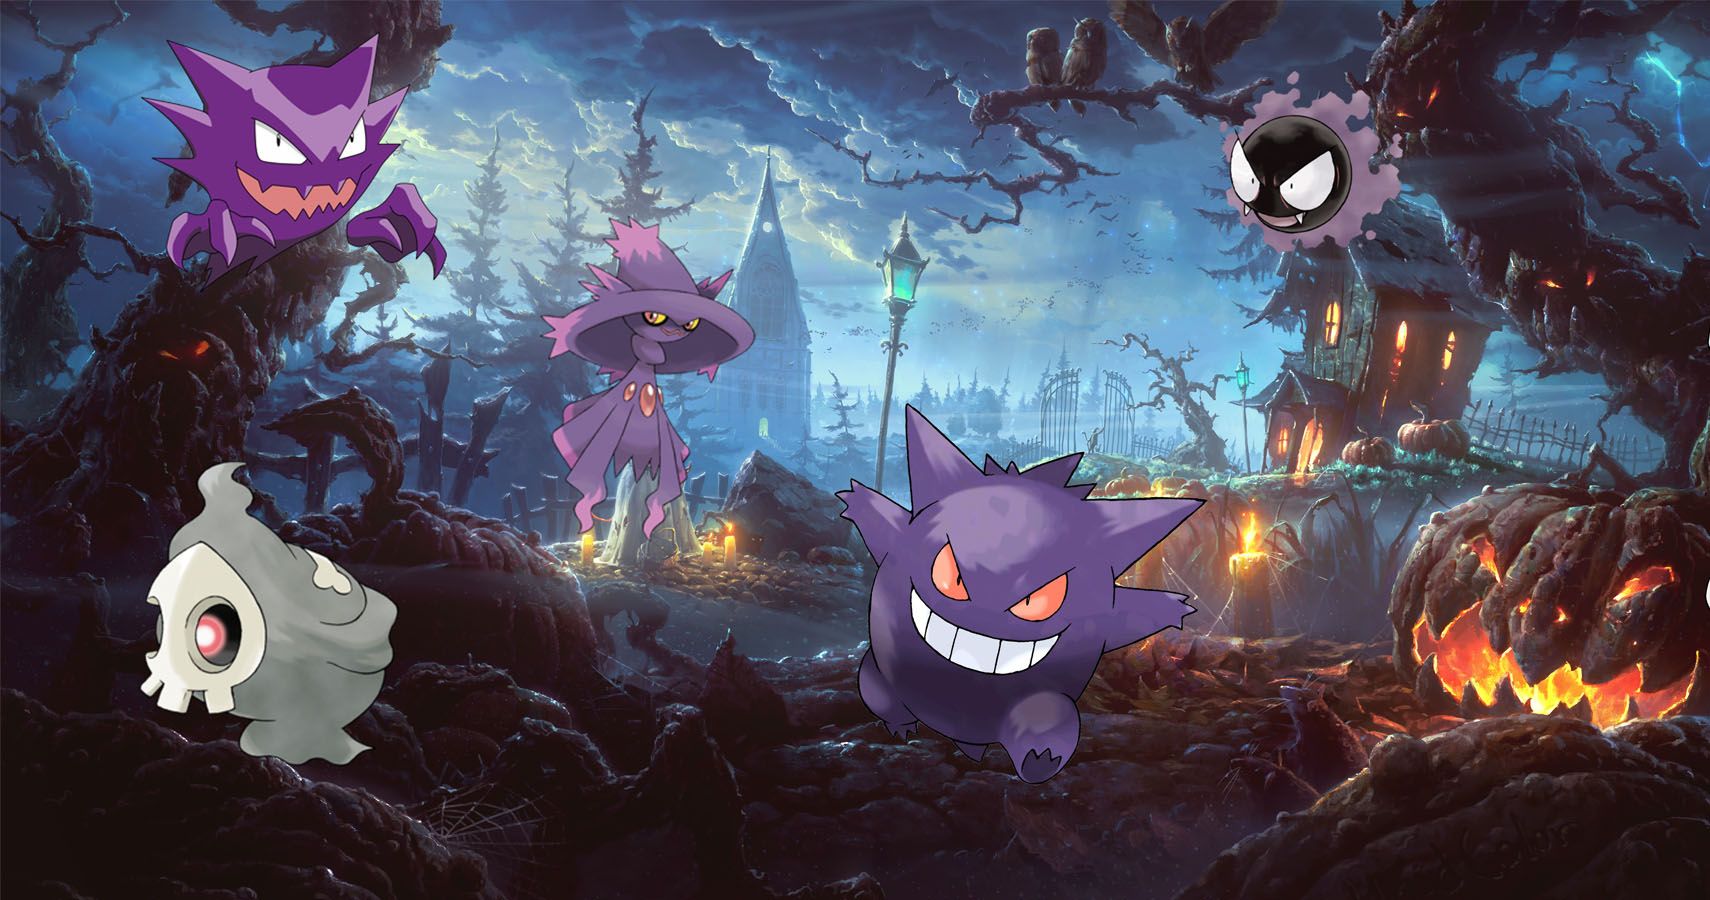 Pokémons Lavender Town Revealed Just In Time For Halloween